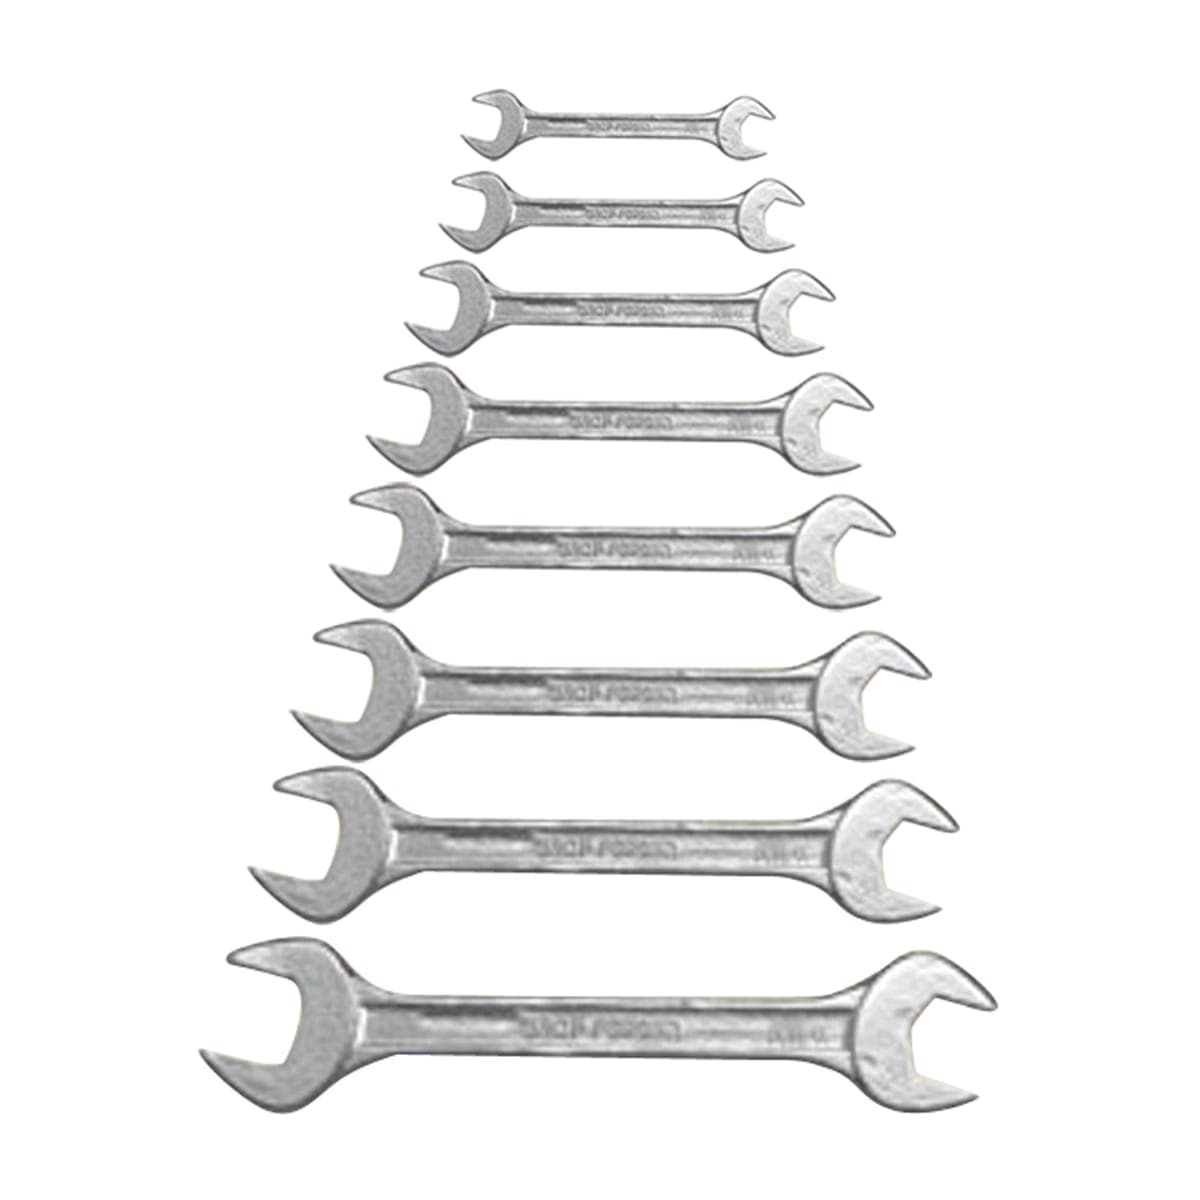 SET OF 8 ASSORTED FORGED STEEL SPANNERS - best price from Maltashopper.com BR400240152